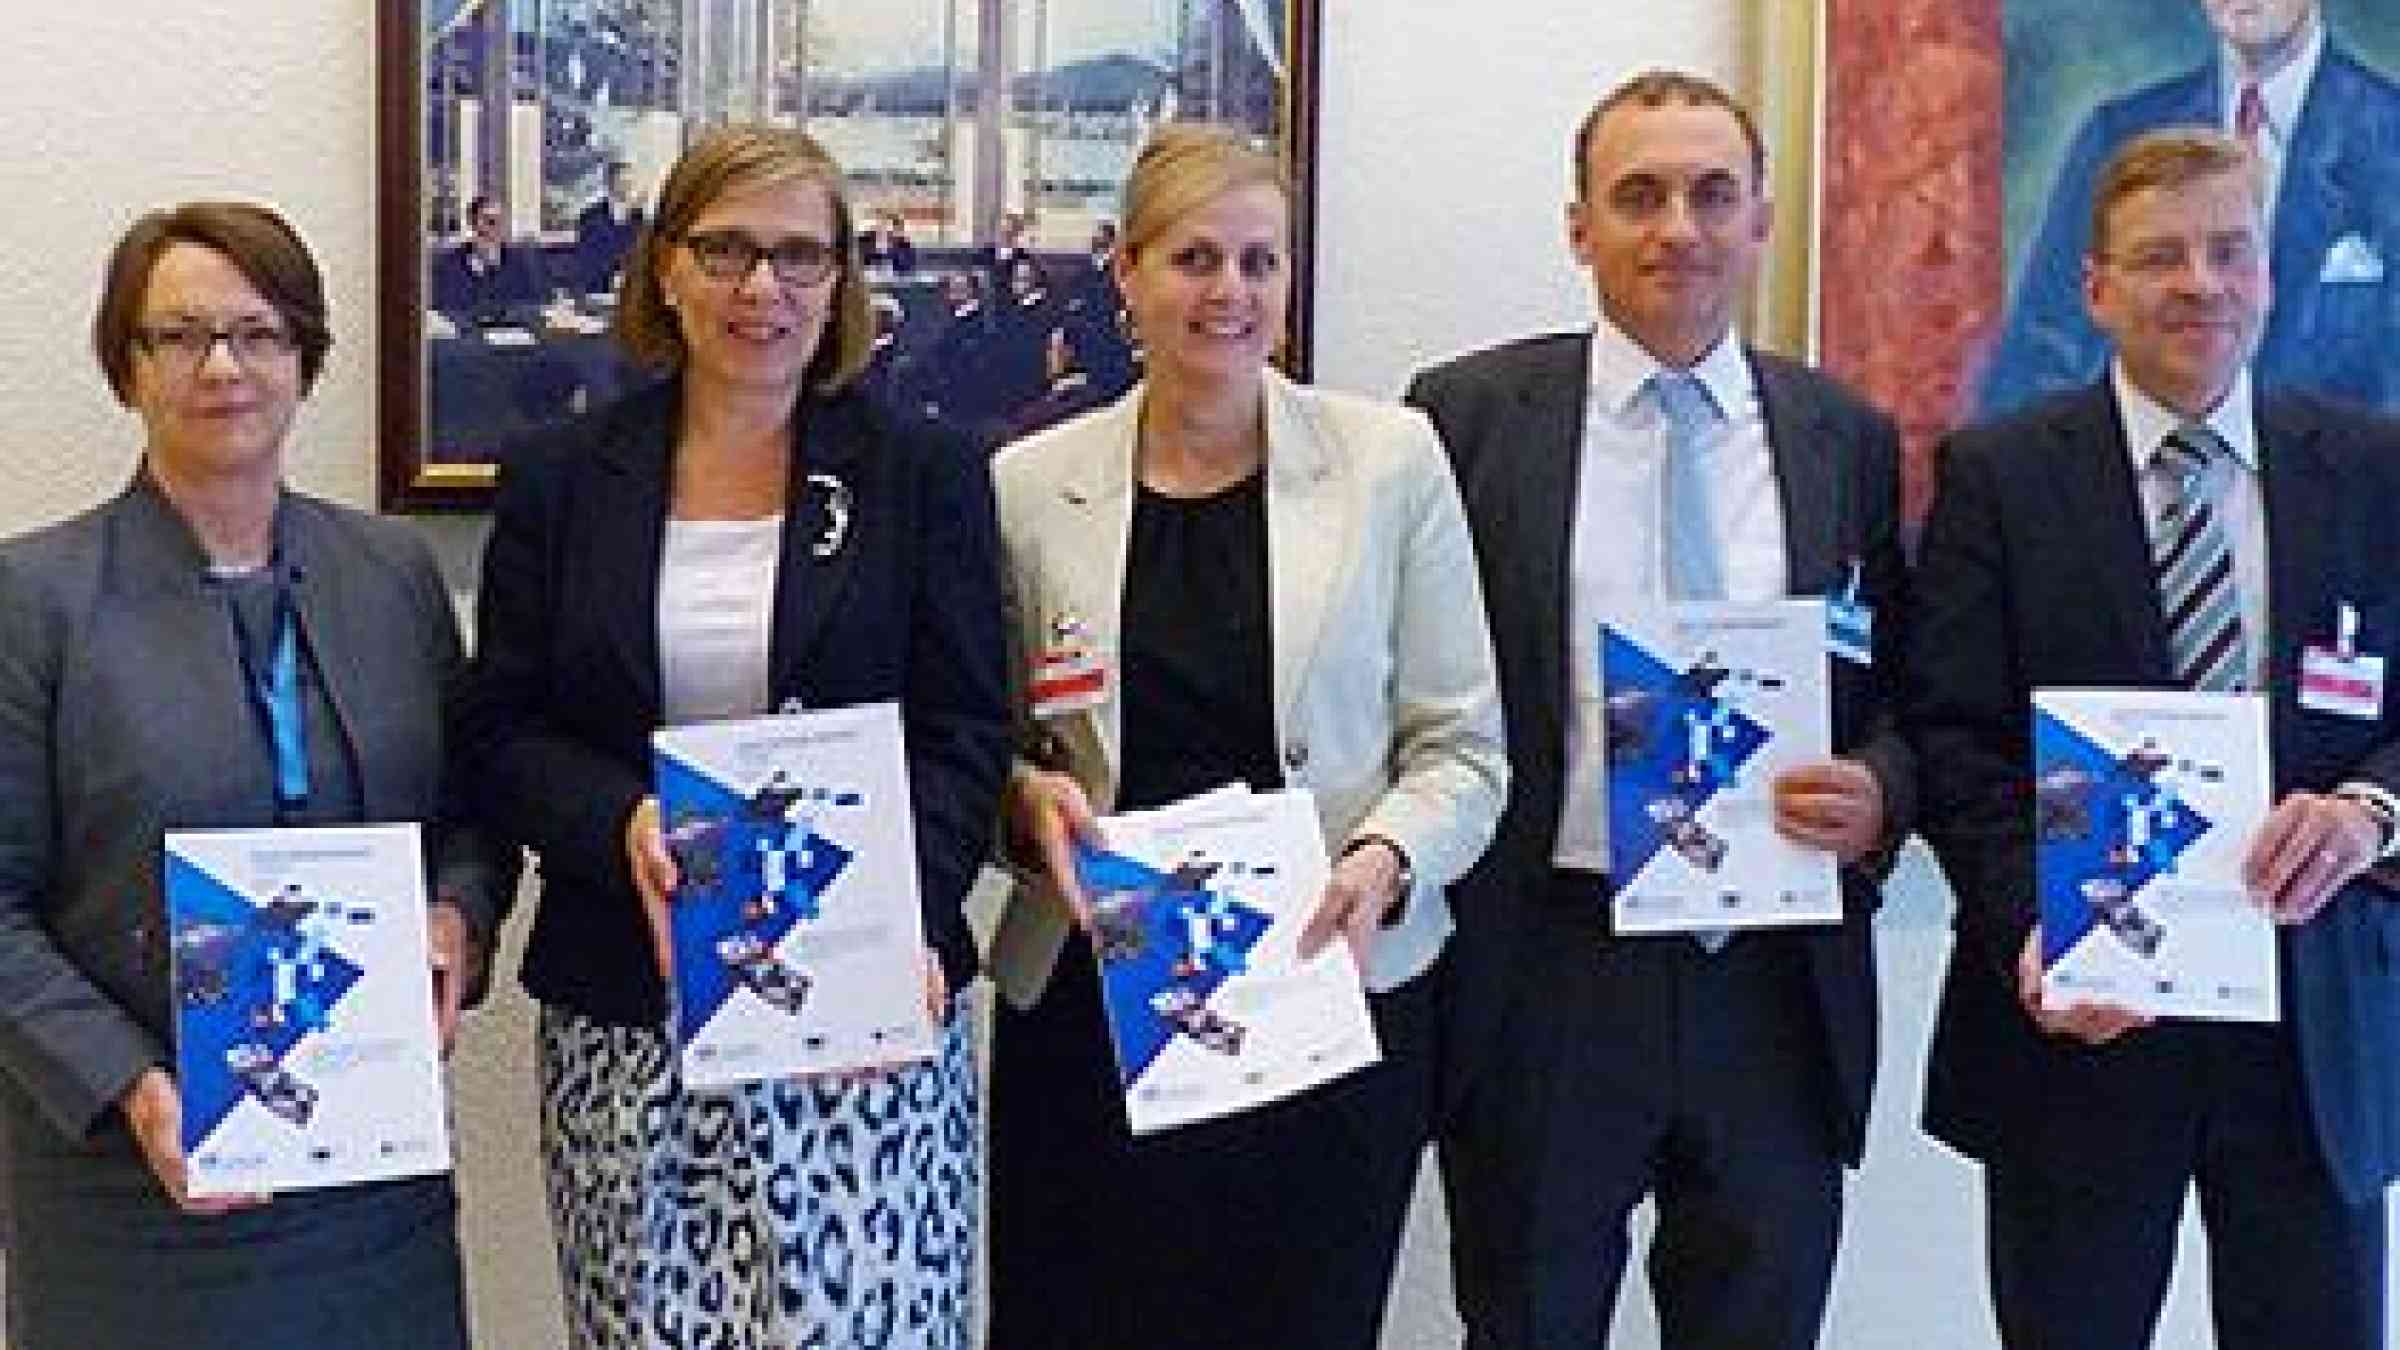 (l. to r.) Elizabeth Longworth, UNISDR Director; Päivi Kairamo, Ambassador to the Permanent Mission of Finland in Geneva; Florika Fink-Hooijer, Director of the European Commission DG ECHO; Stéphane Jacobzone, Deputy Head of Division, Reform of the Public Sector, OECD; Antti Rytövuori, Minister and Deputy Permanent Representative to the Permanent Mission of Finland in Geneva. (Photo: UNISDR)